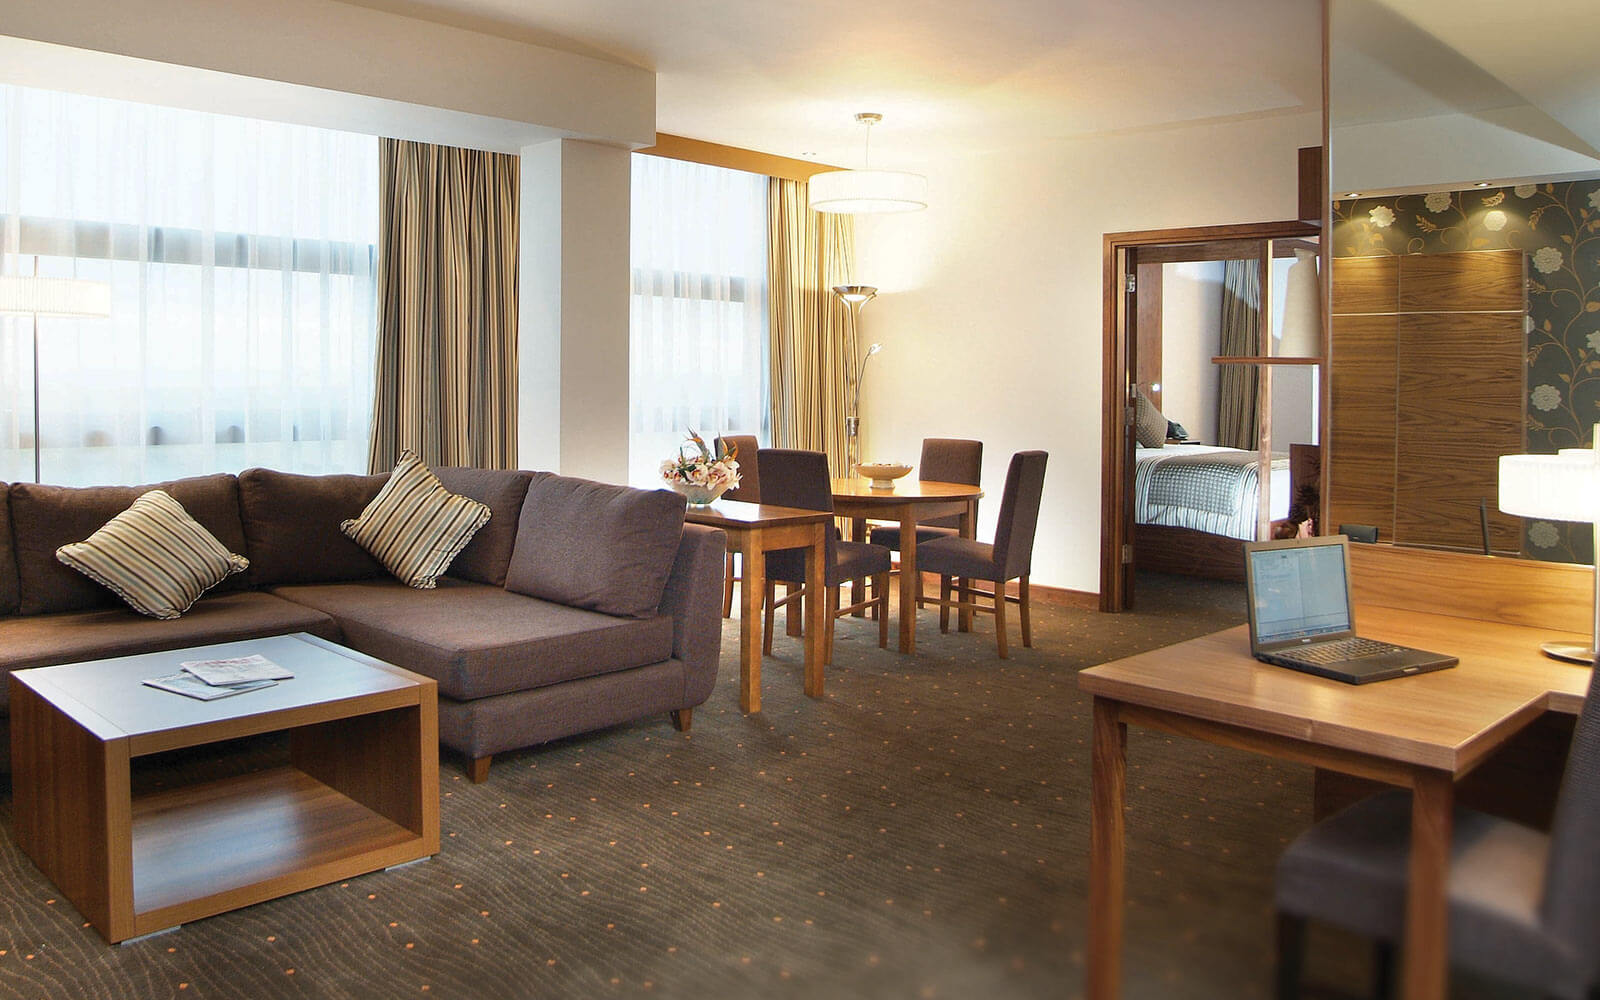 Living area of suite in Dundalk hotel